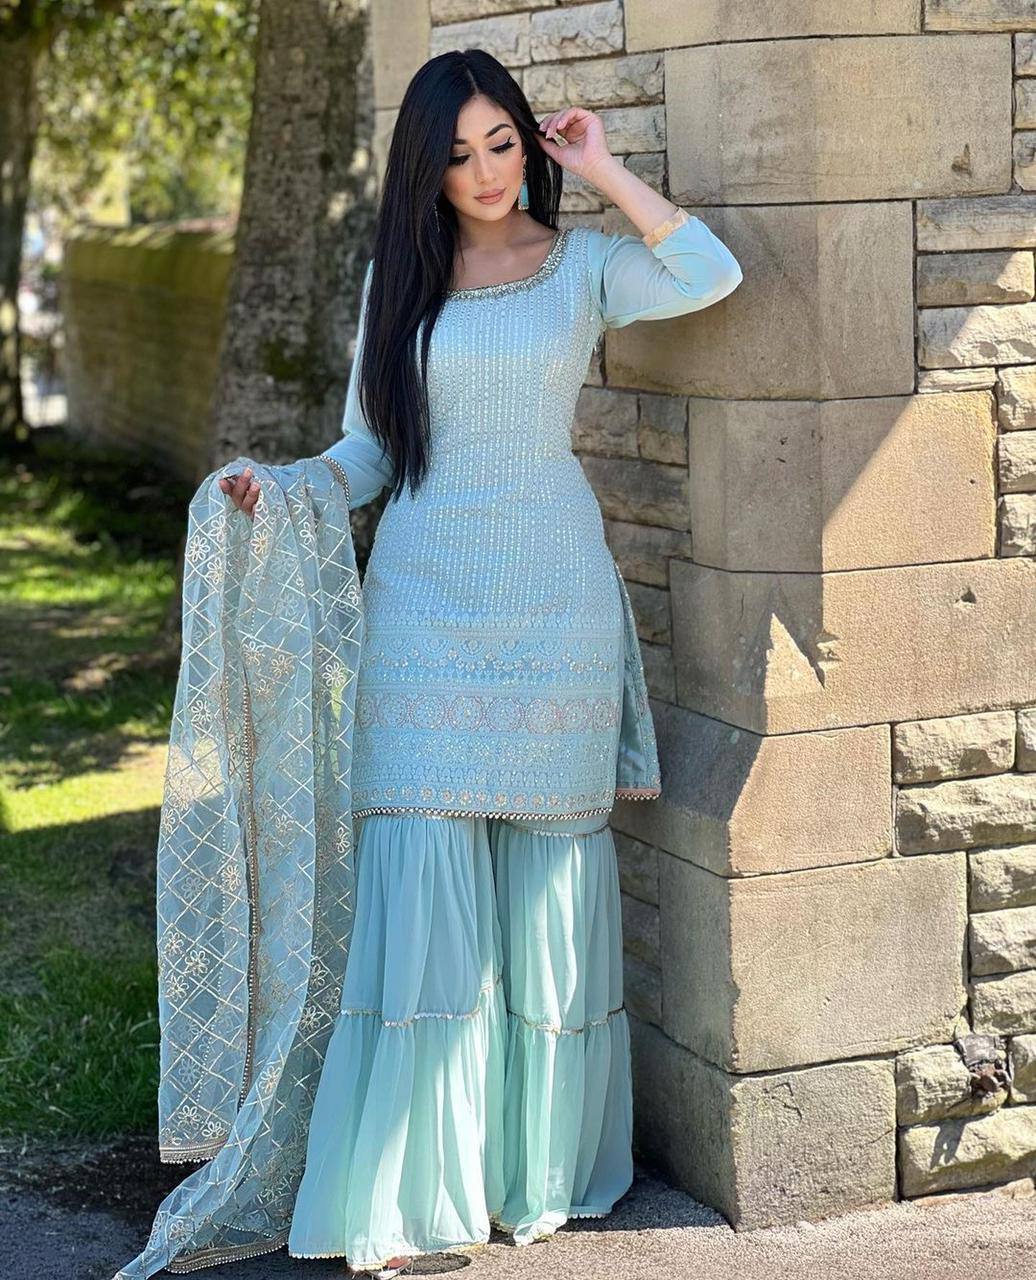 Party wear dress | Mint Green Palazzo Suit for women | Crop top outfits  indian, Green dress outfit, Mint green dress outfit